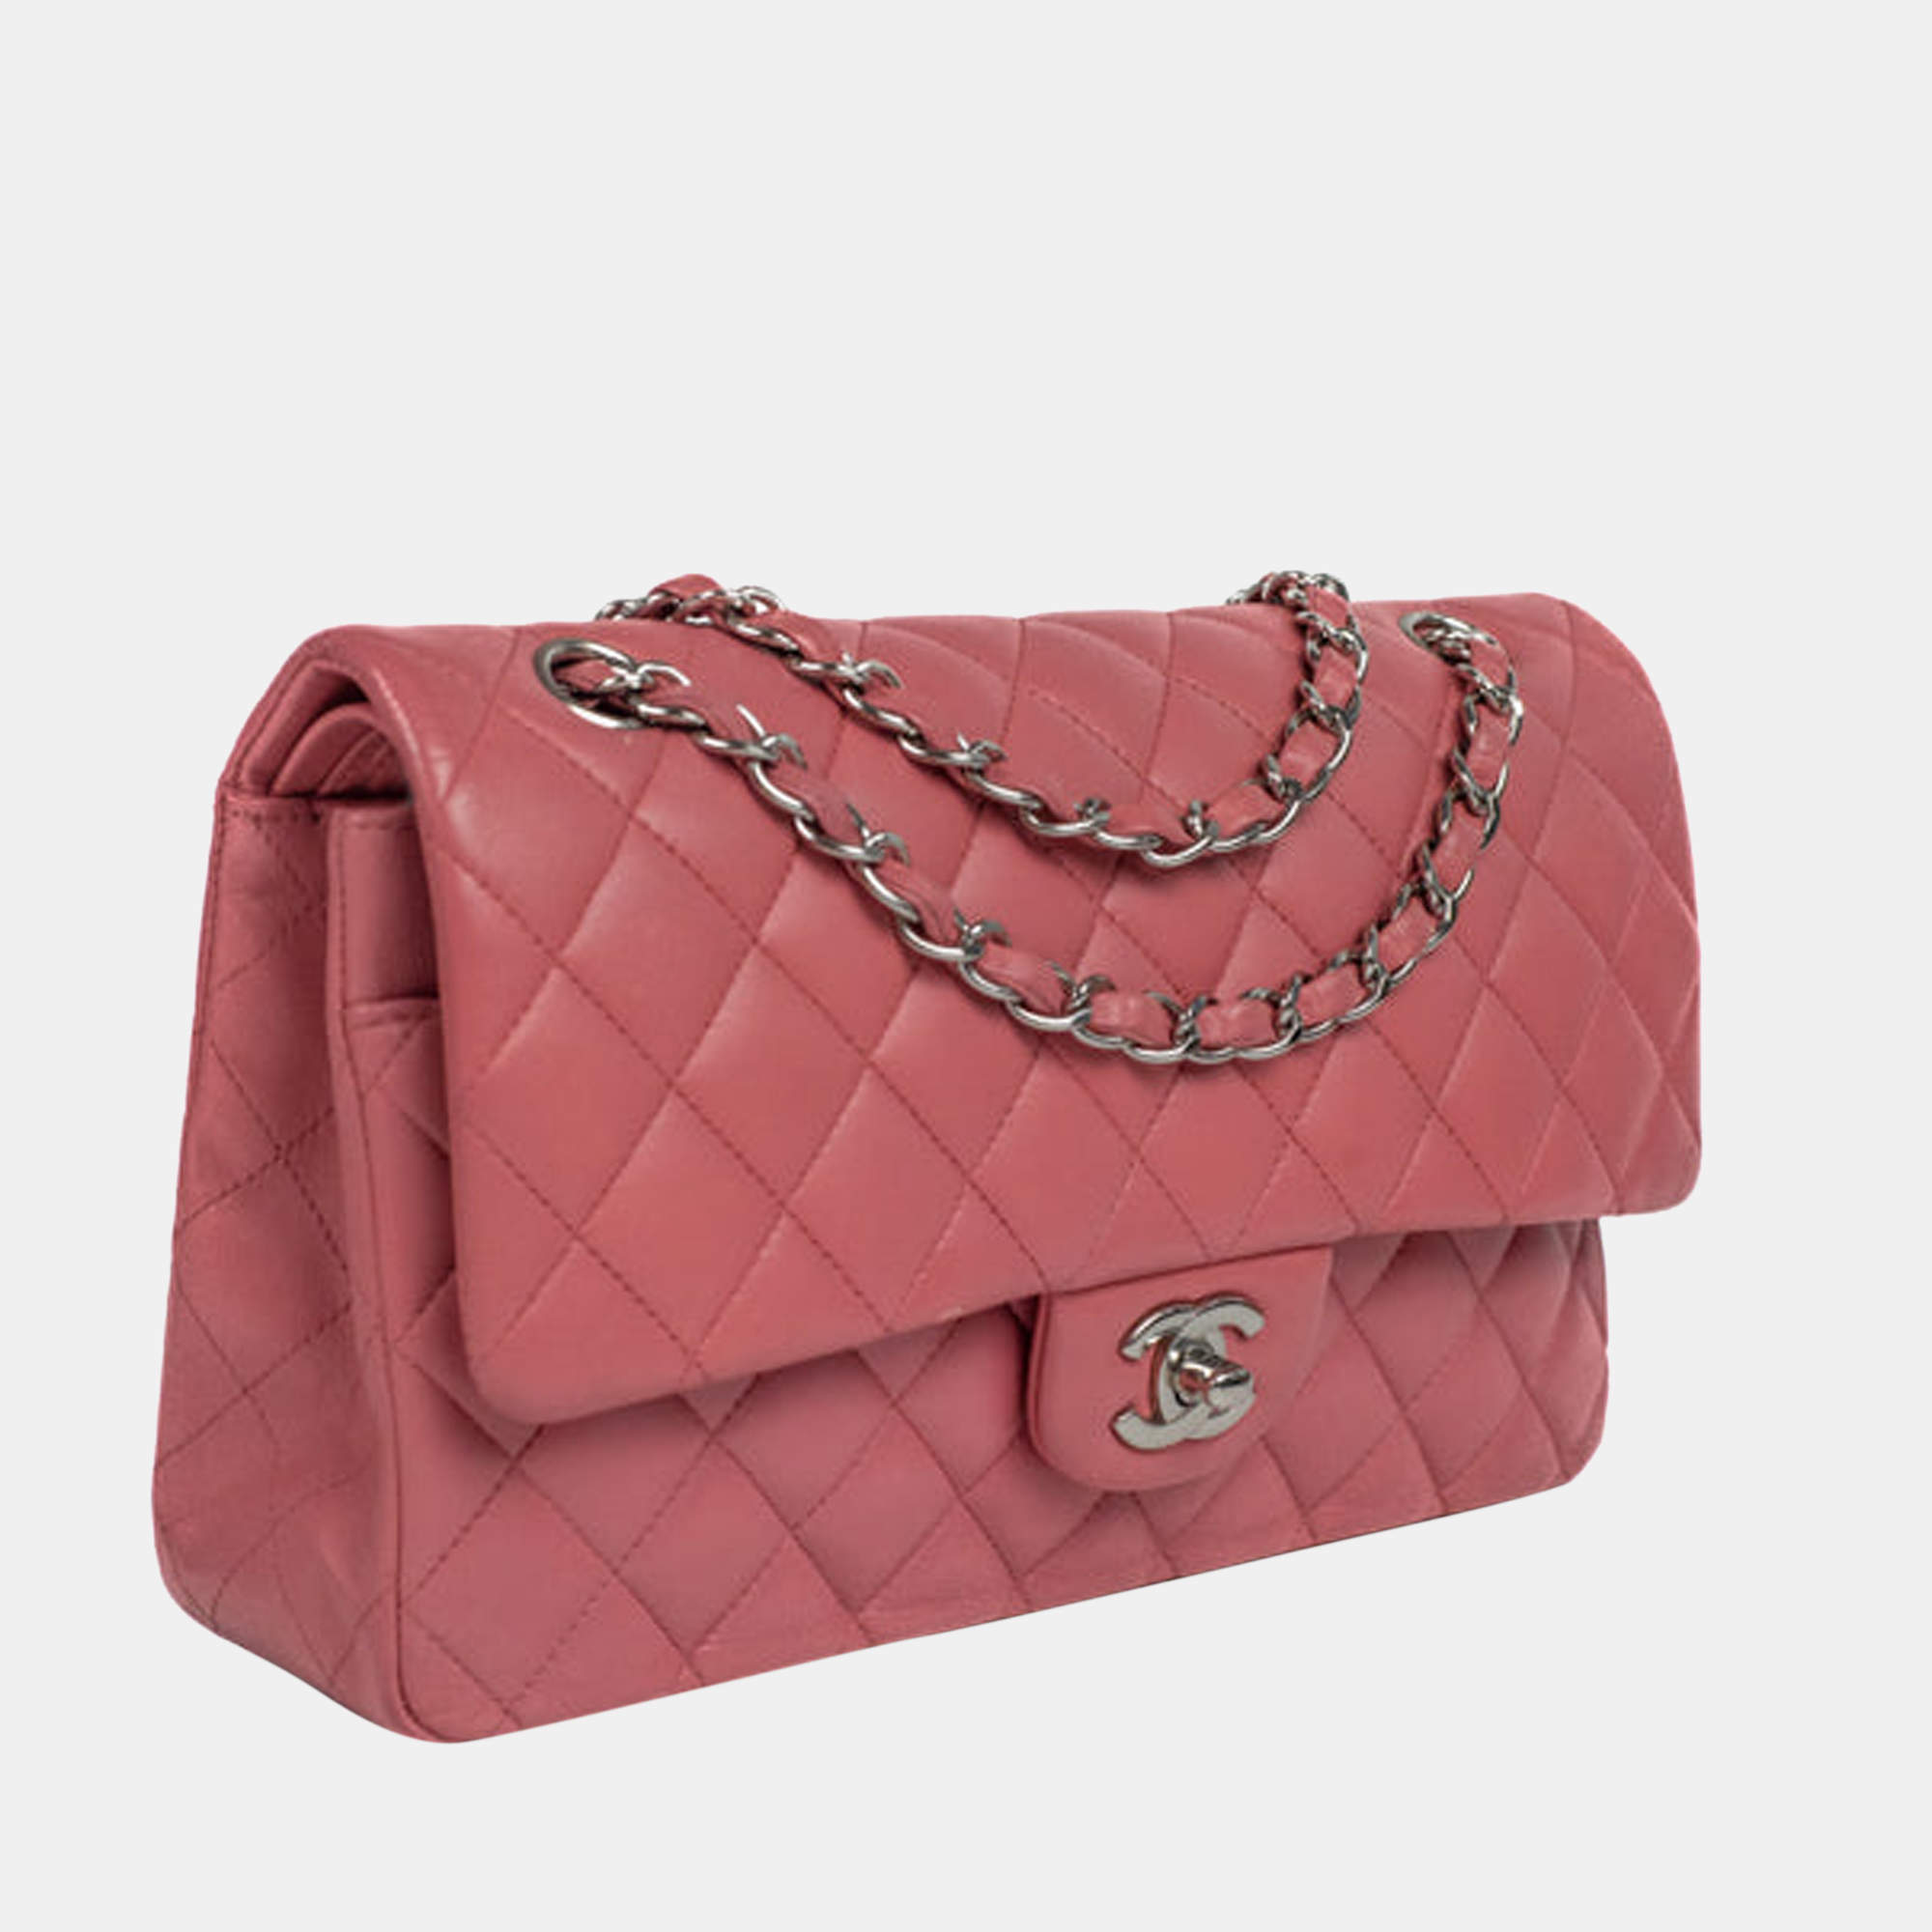 Chanel classic flap bag hot pink small  Pink chanel bag Chanel mini flap  bag Chanel classic flap bag